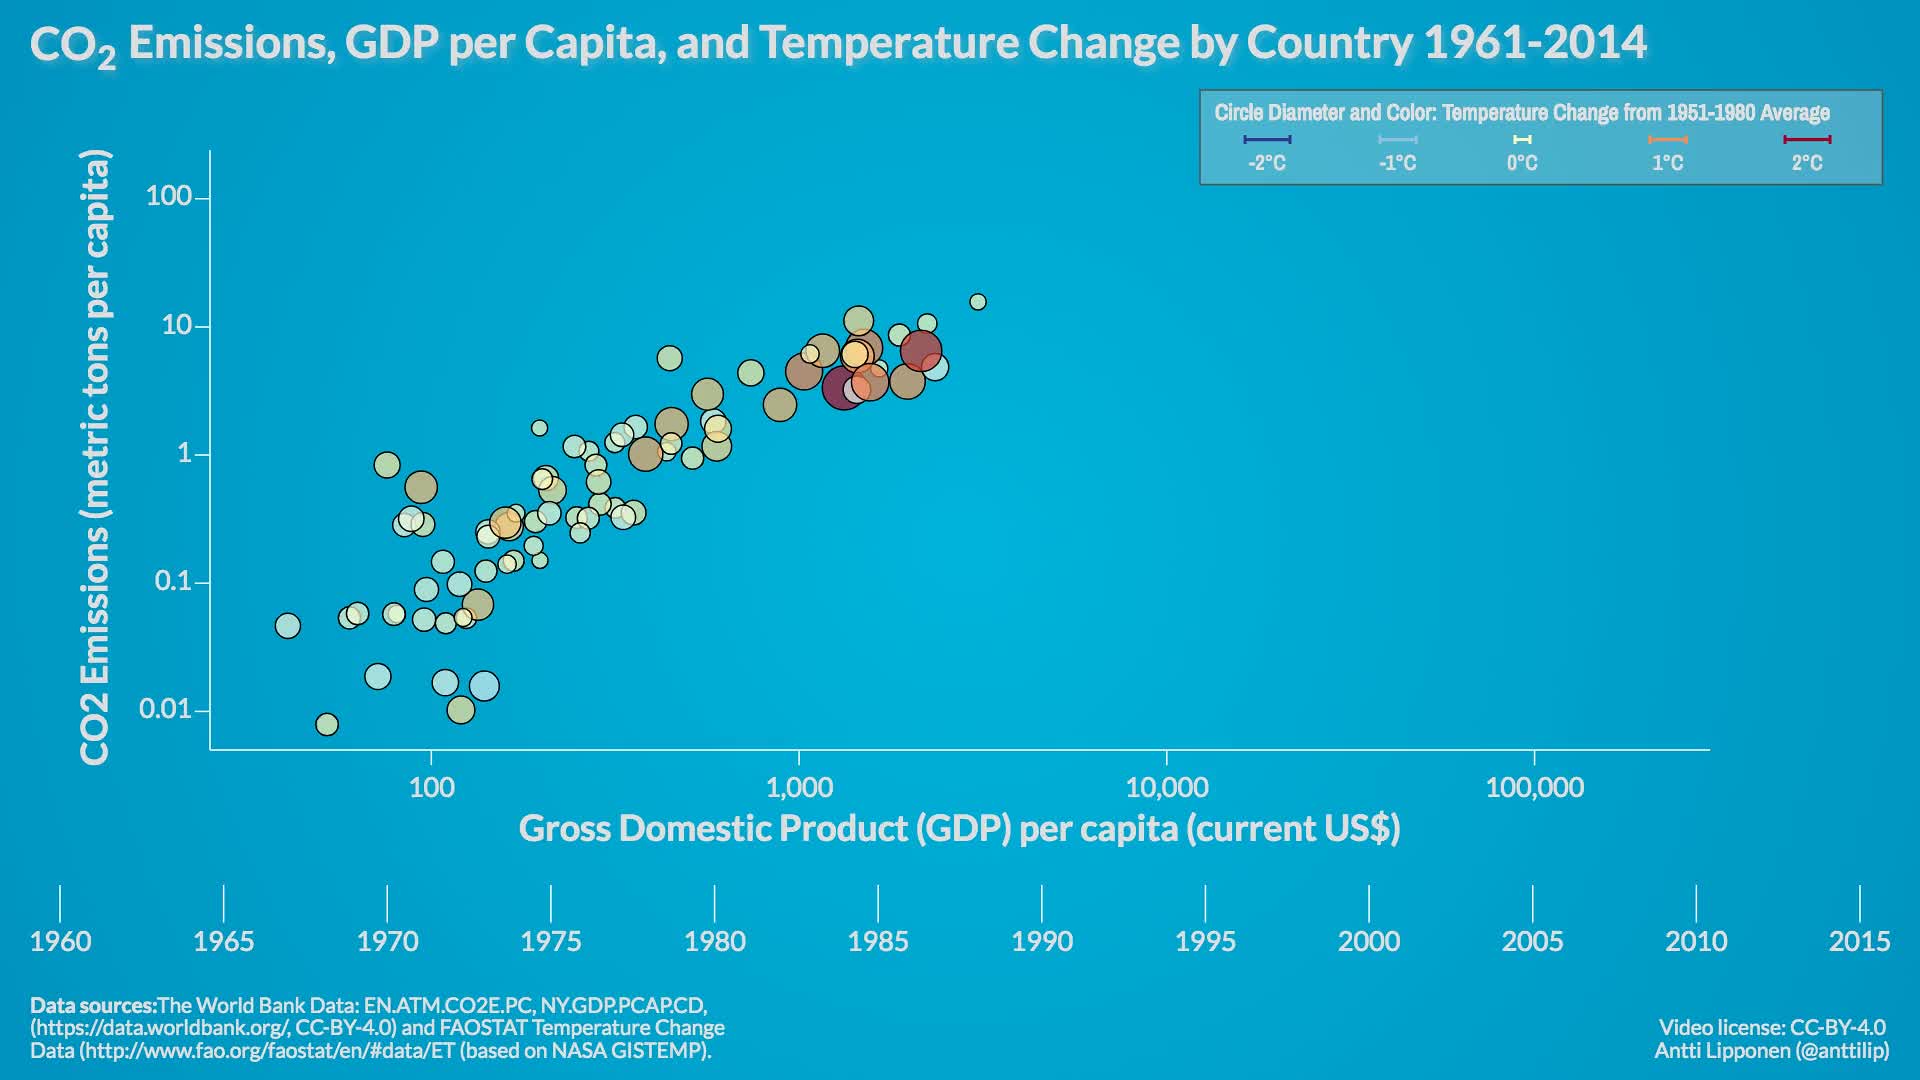 CO2 emissions, GDP & temperature by country 1961-2014